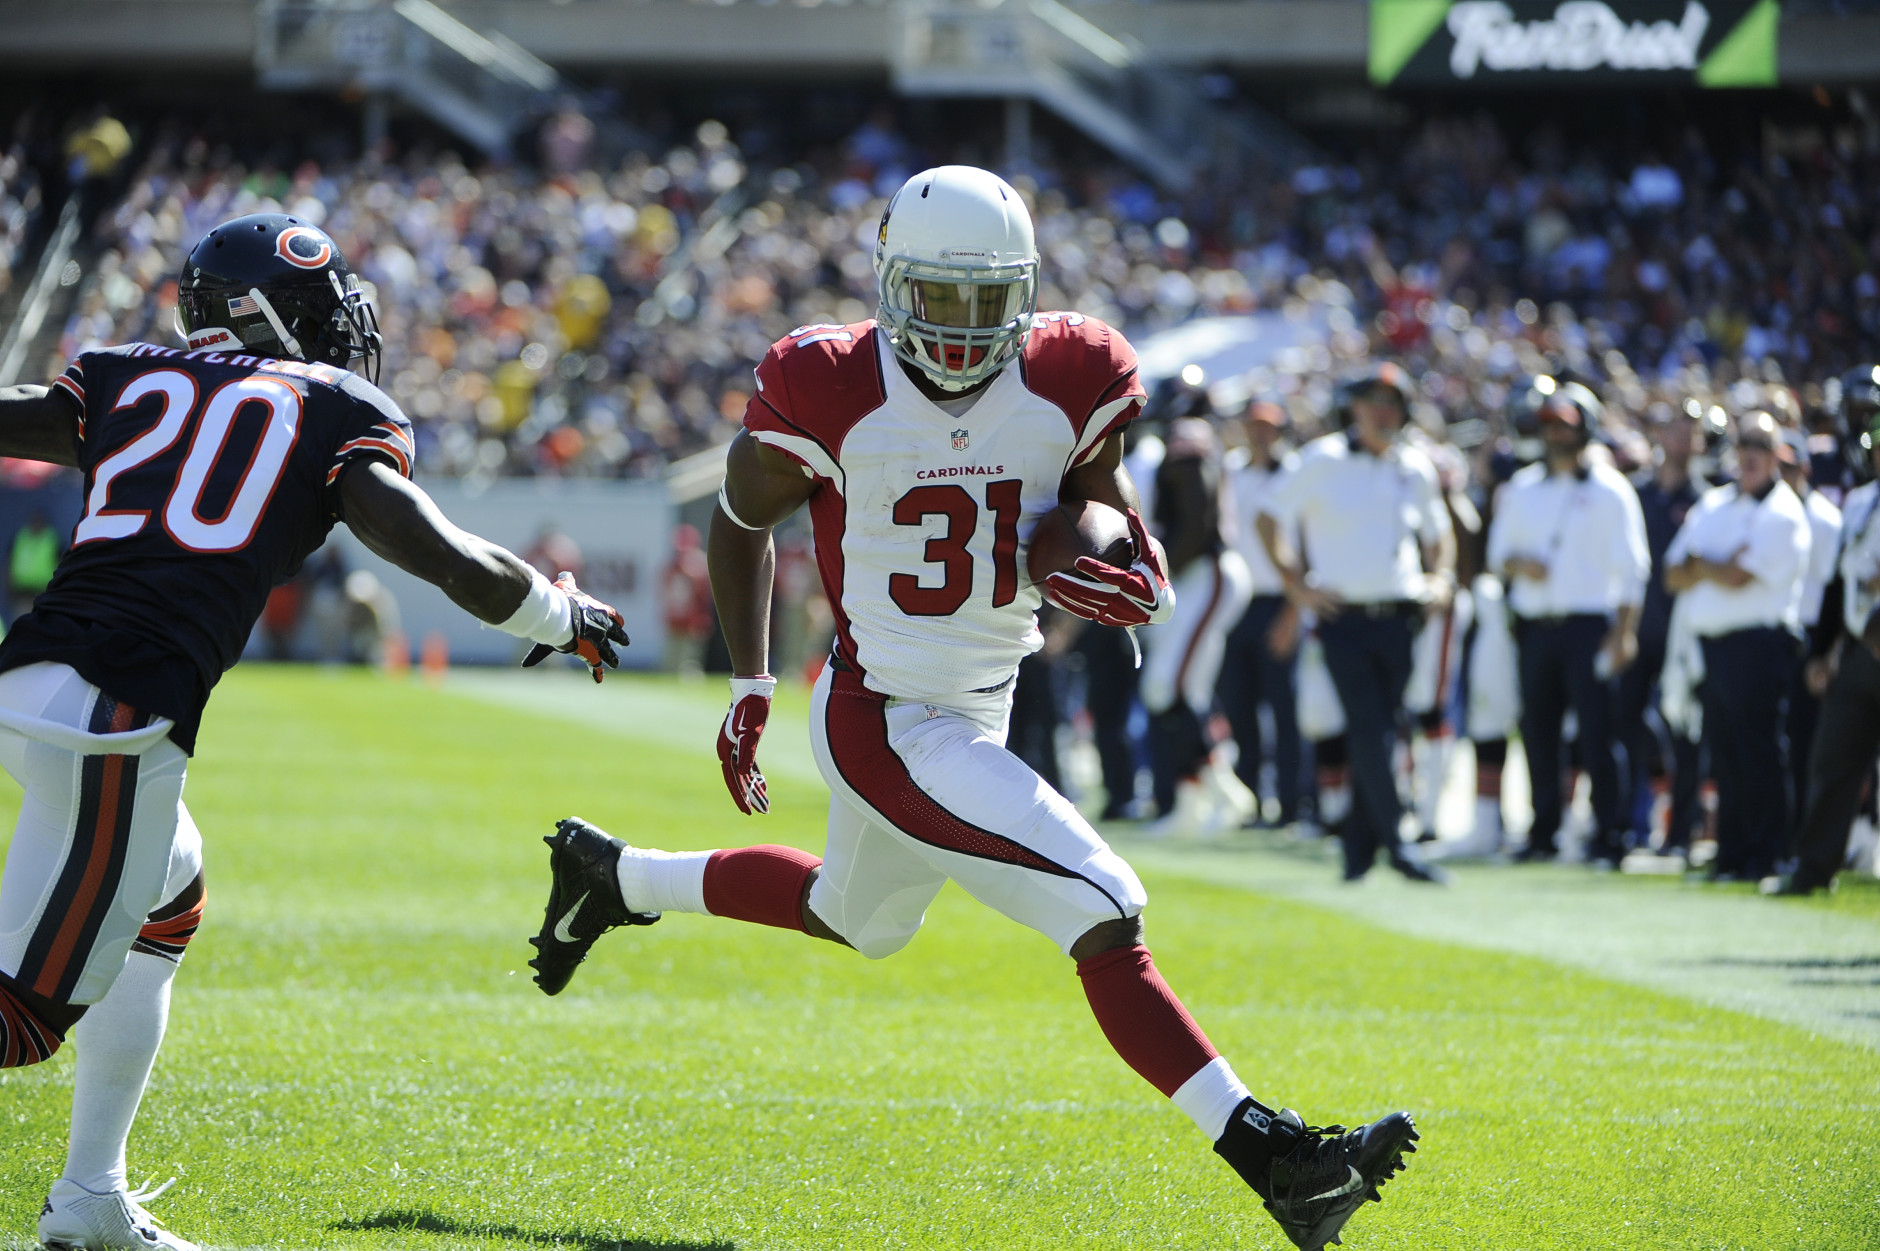 Arizona Cardinals running back David Johnson (31) runs past Chicago Bears cornerback Terrance Mitchell (20) for a touchdown during the second half of an NFL football game, Sunday, Sept. 20, 2015, in Chicago. (AP Photo/David Banks)